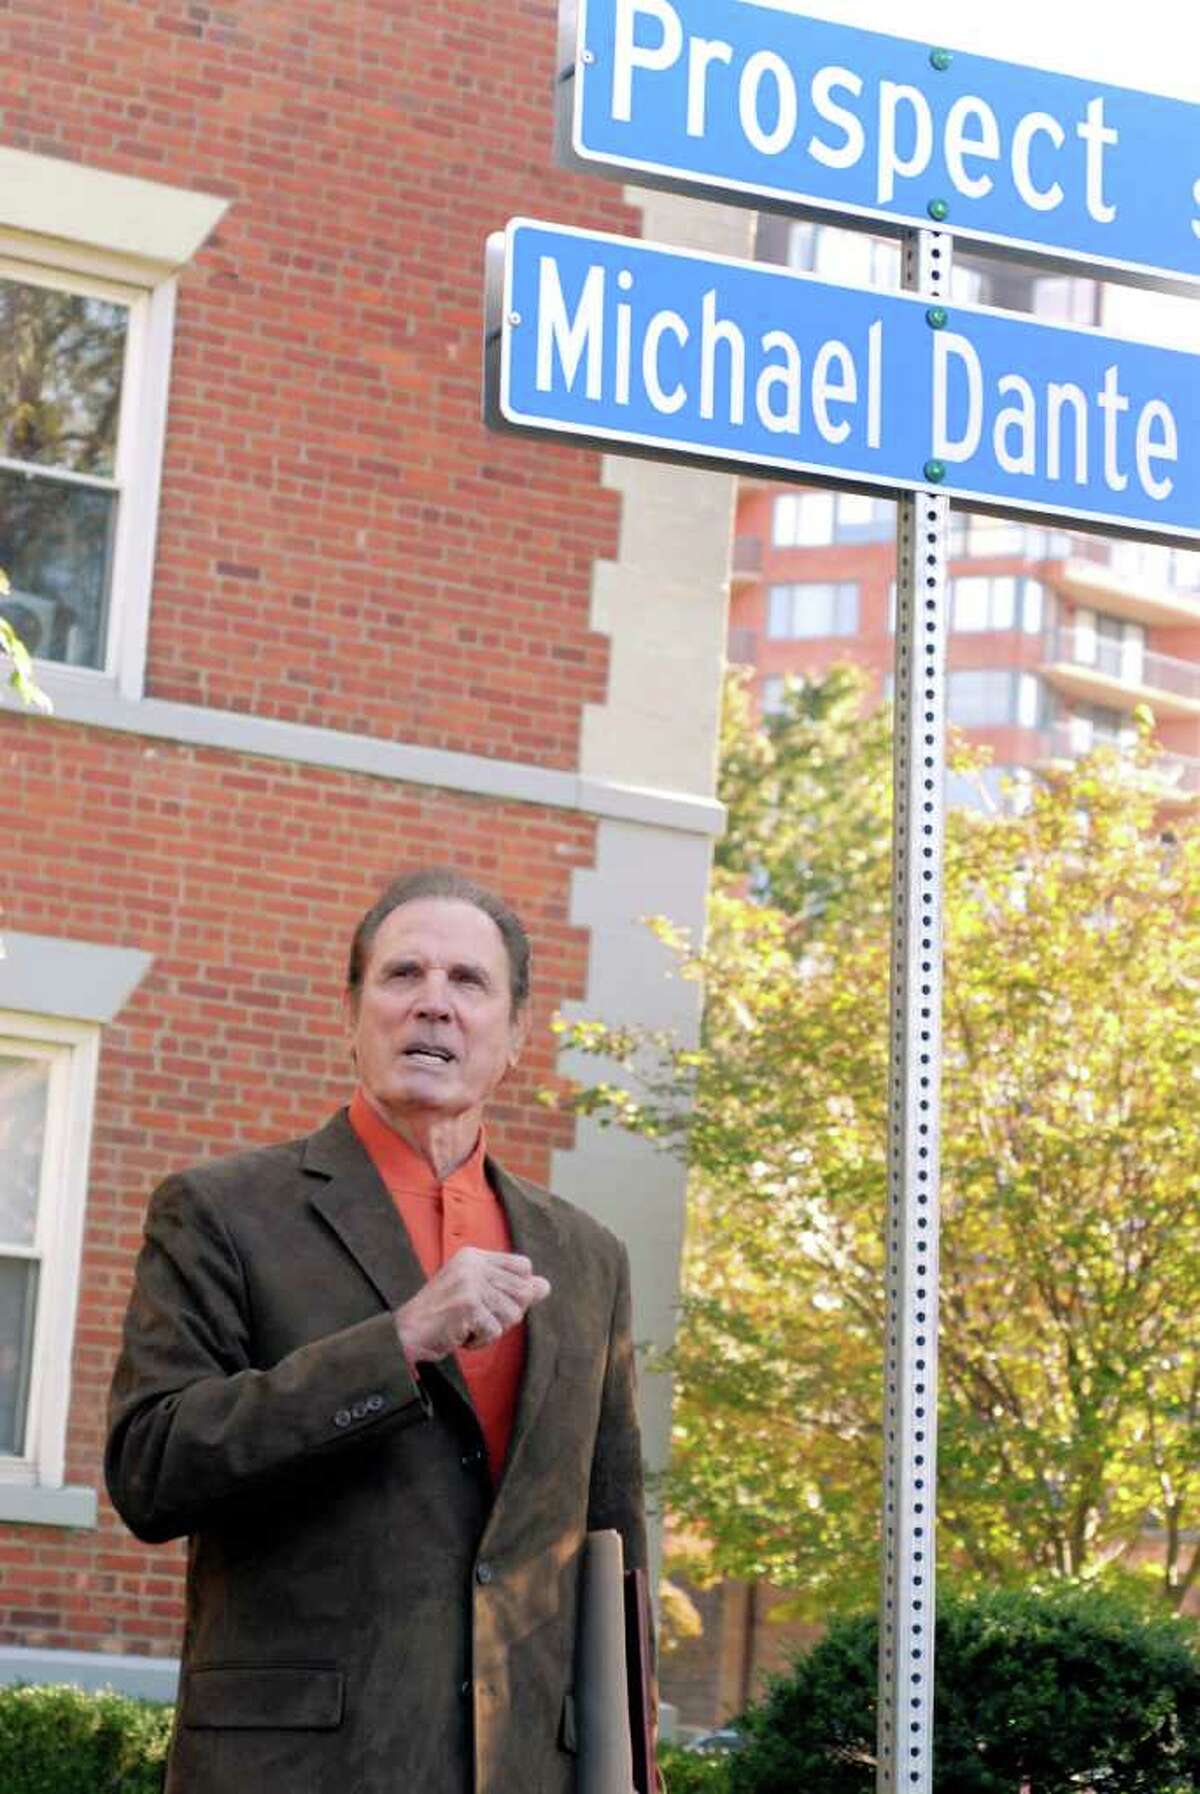 A portion of Prospect Street in Stamford, Conn. is named after veteran Hollywood actor Michael Dante on Friday October 7, 2011. Dante is the parade marshal of Sunday's Columbus Day Parade.